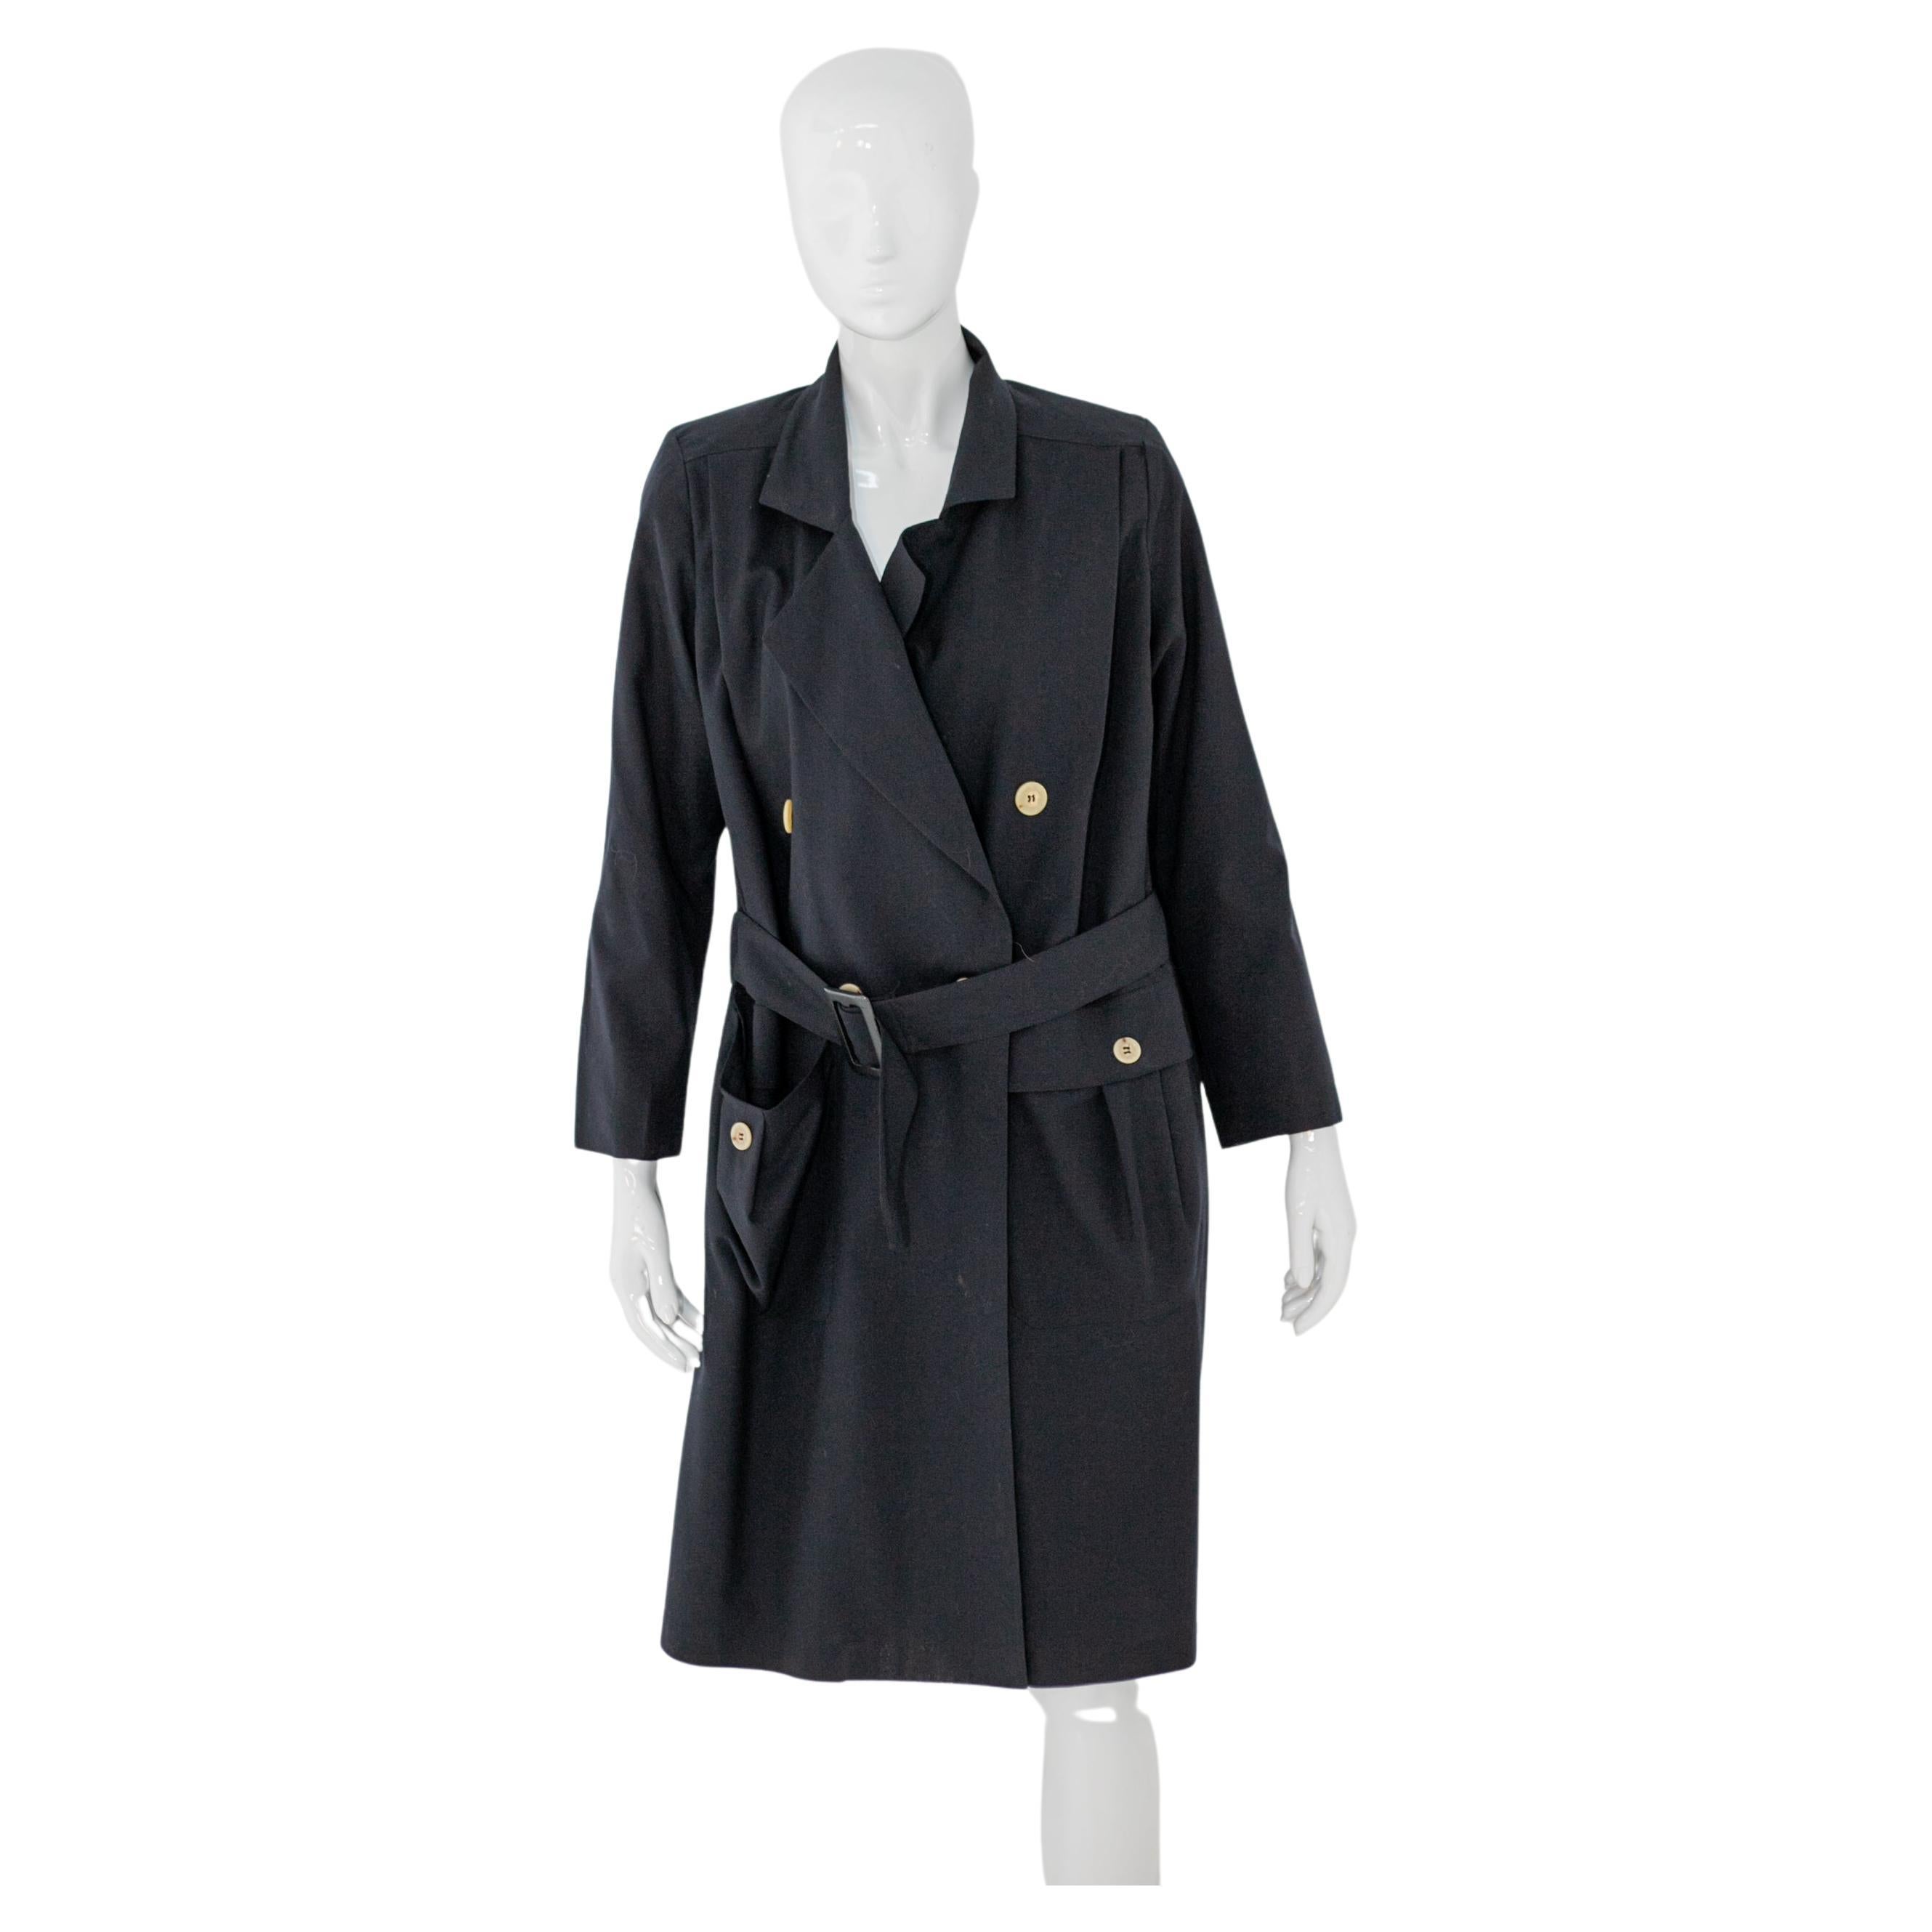 Titolo Vintage Black Trench Coat with Belt